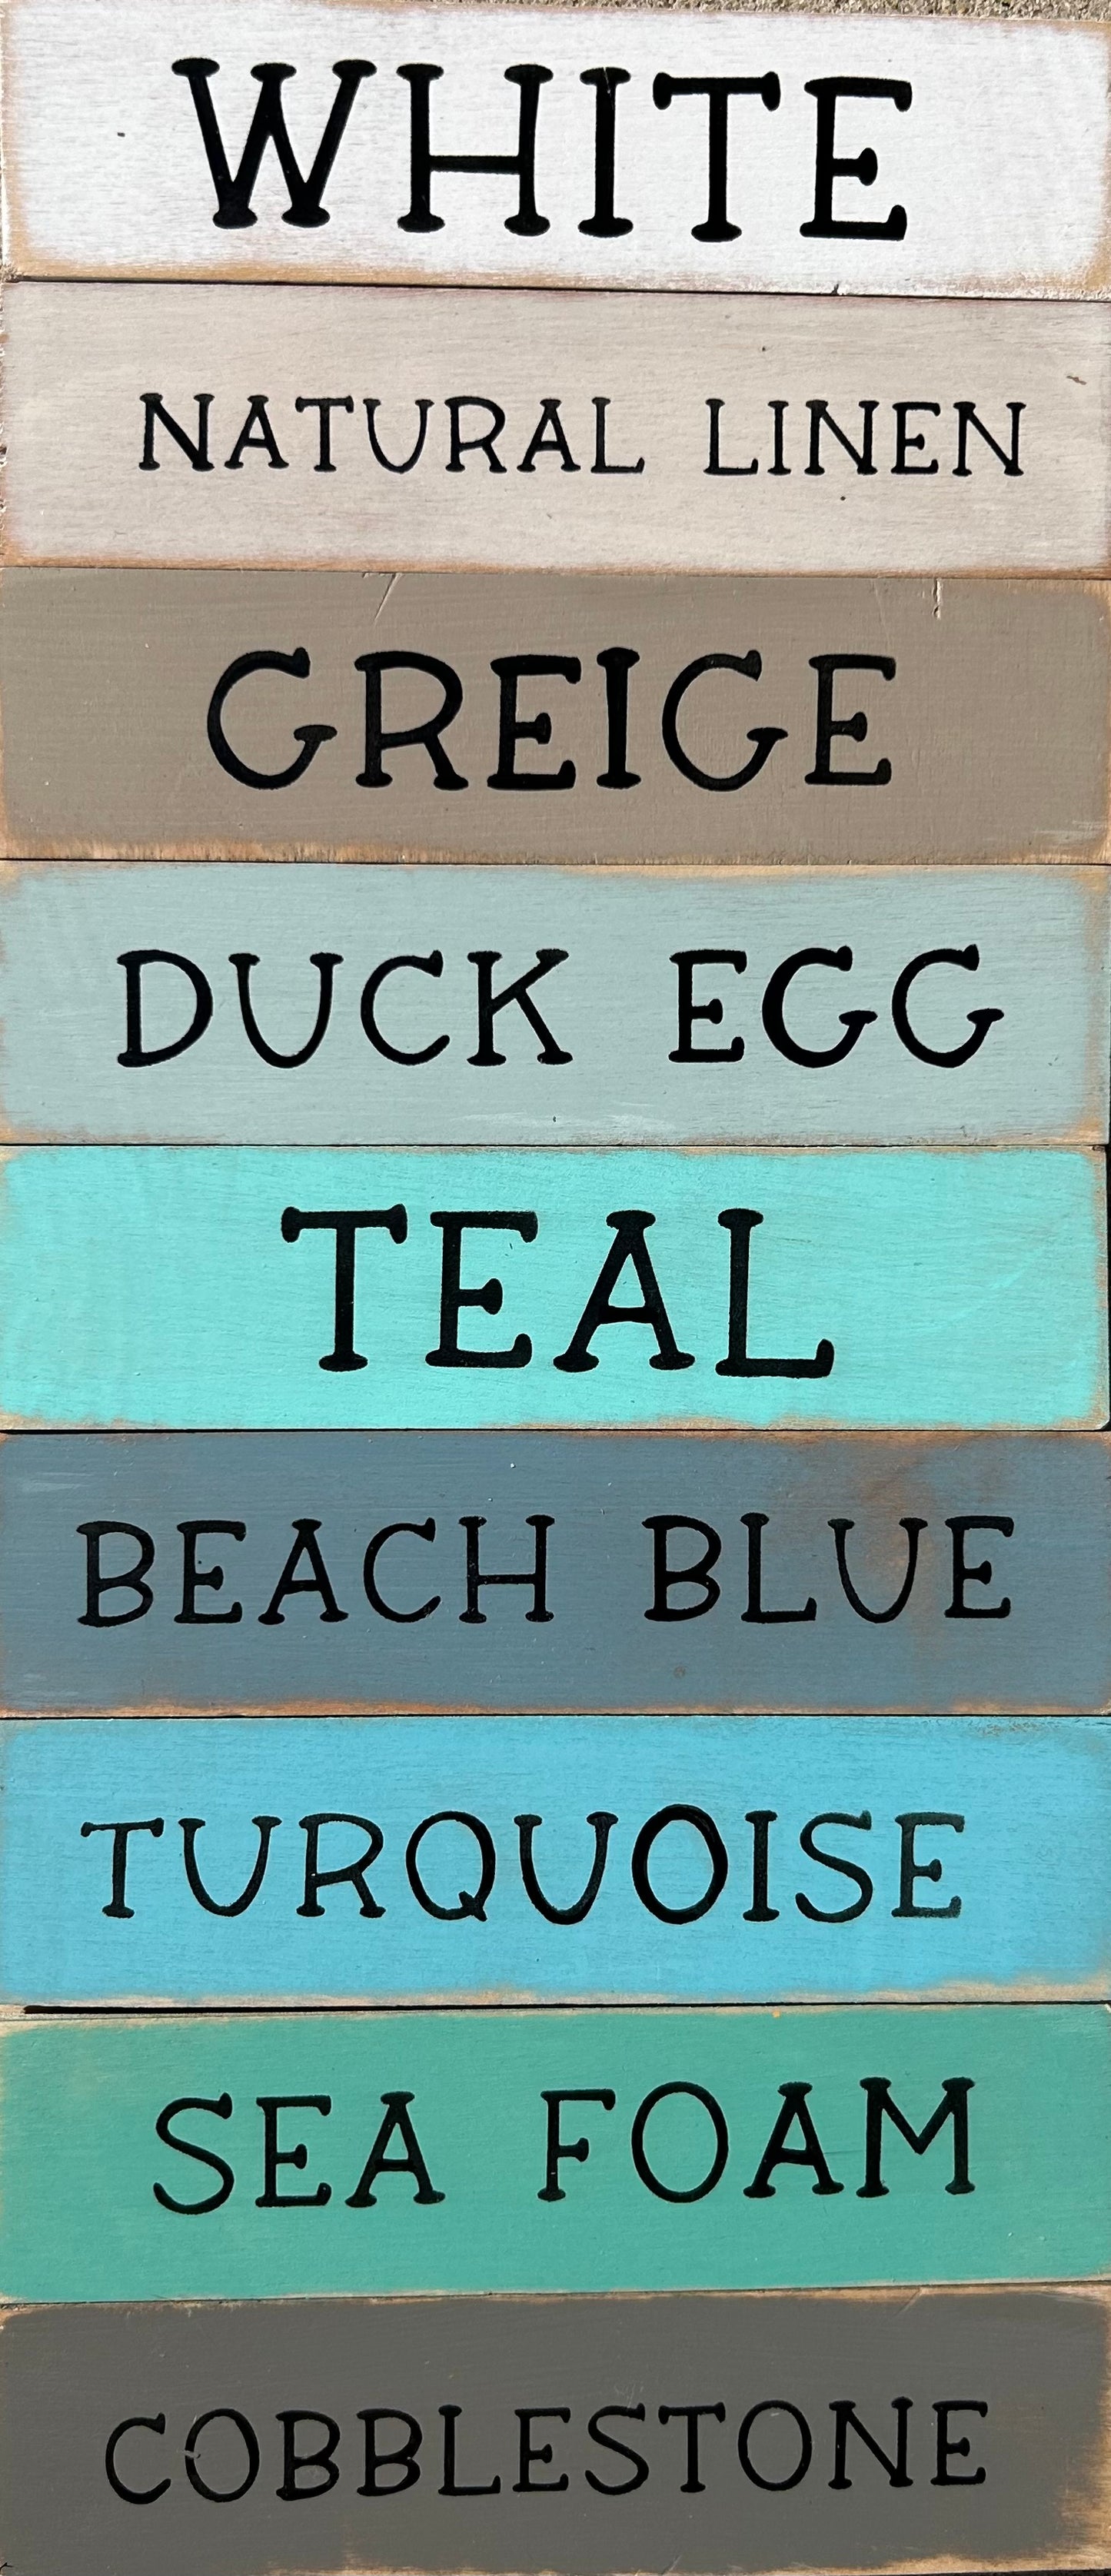 At the Beach We Don't Hide Crazy - Funny Rustic Wood Sign